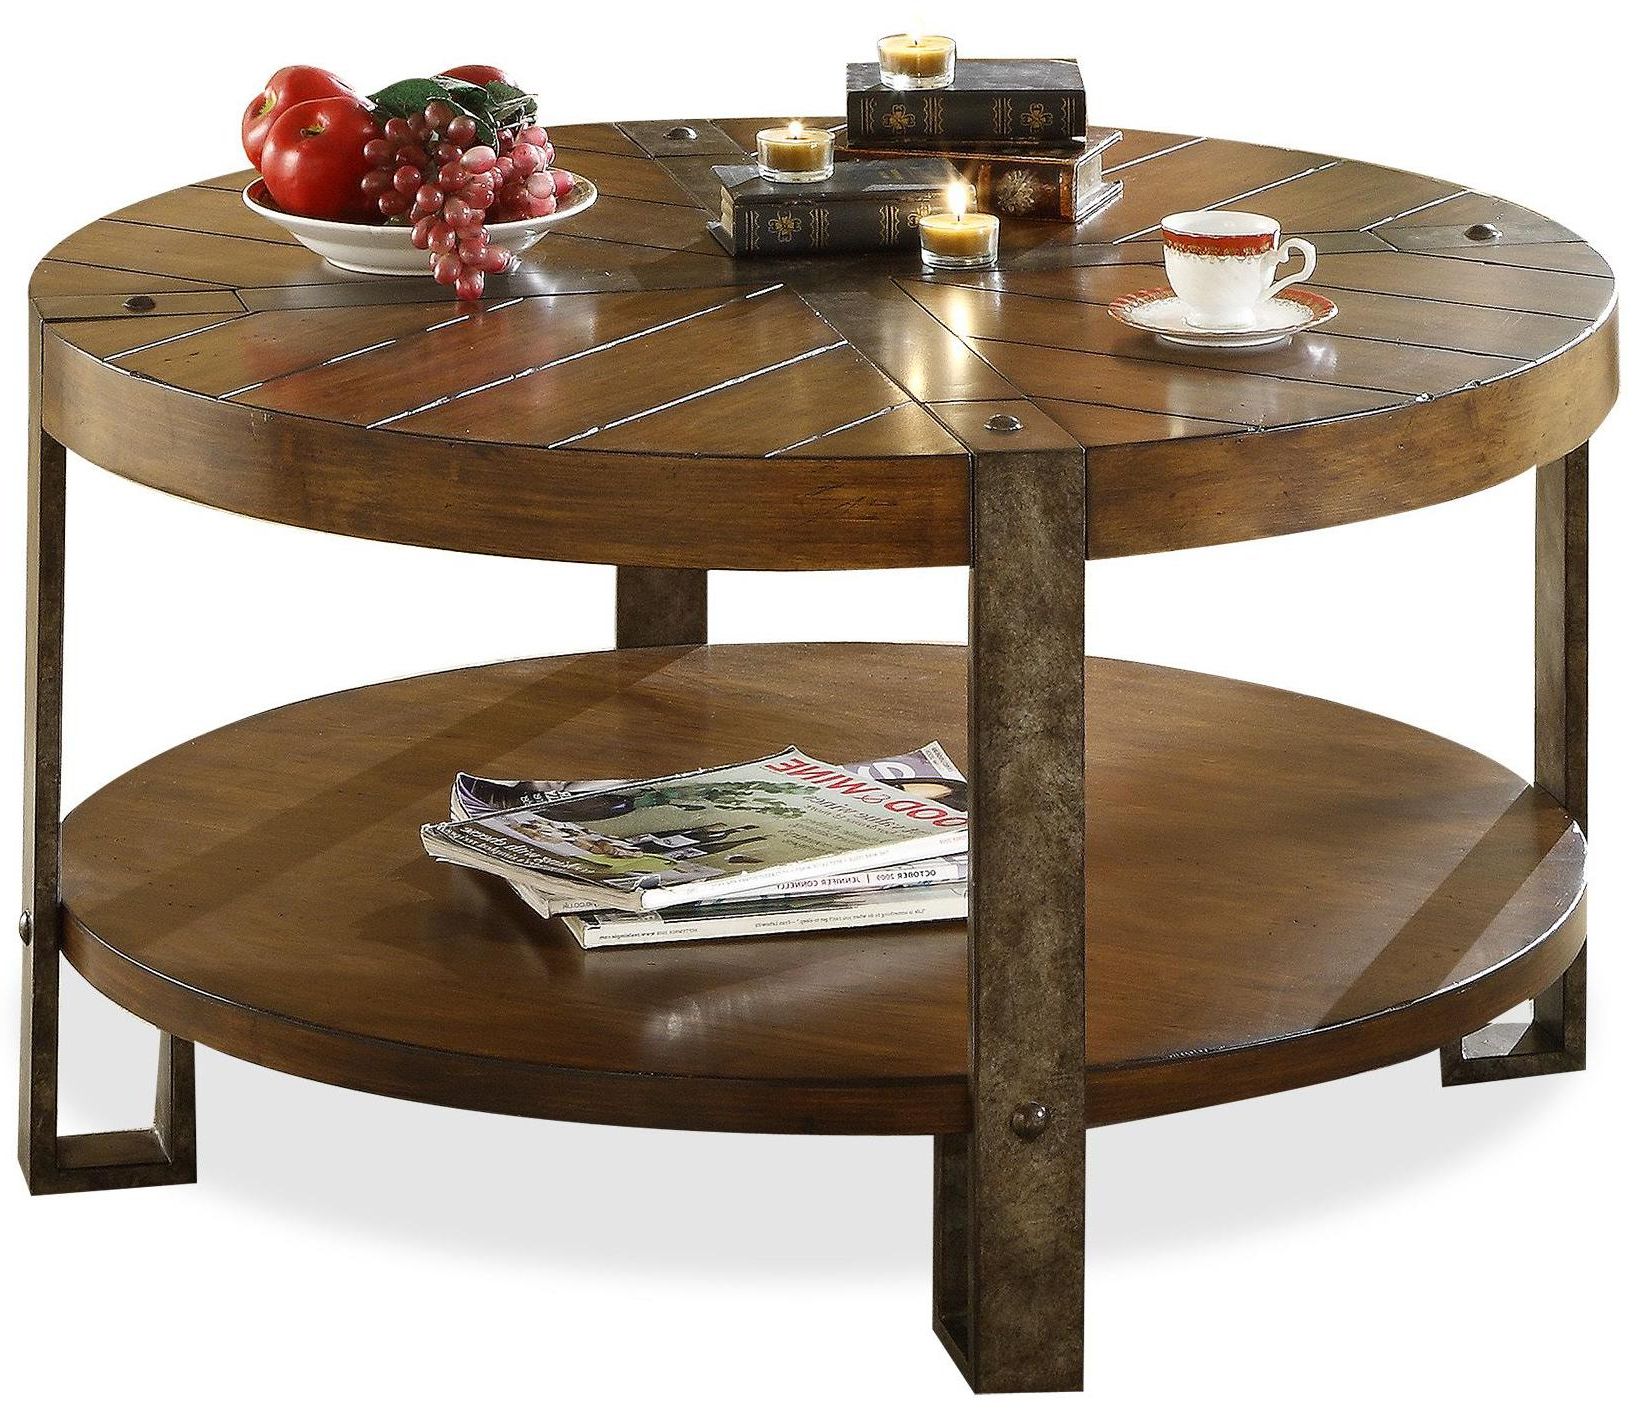 Well Known Round Coffee Tables With Storage – Homesfeed With Round Coffee Tables With Storage (View 7 of 15)